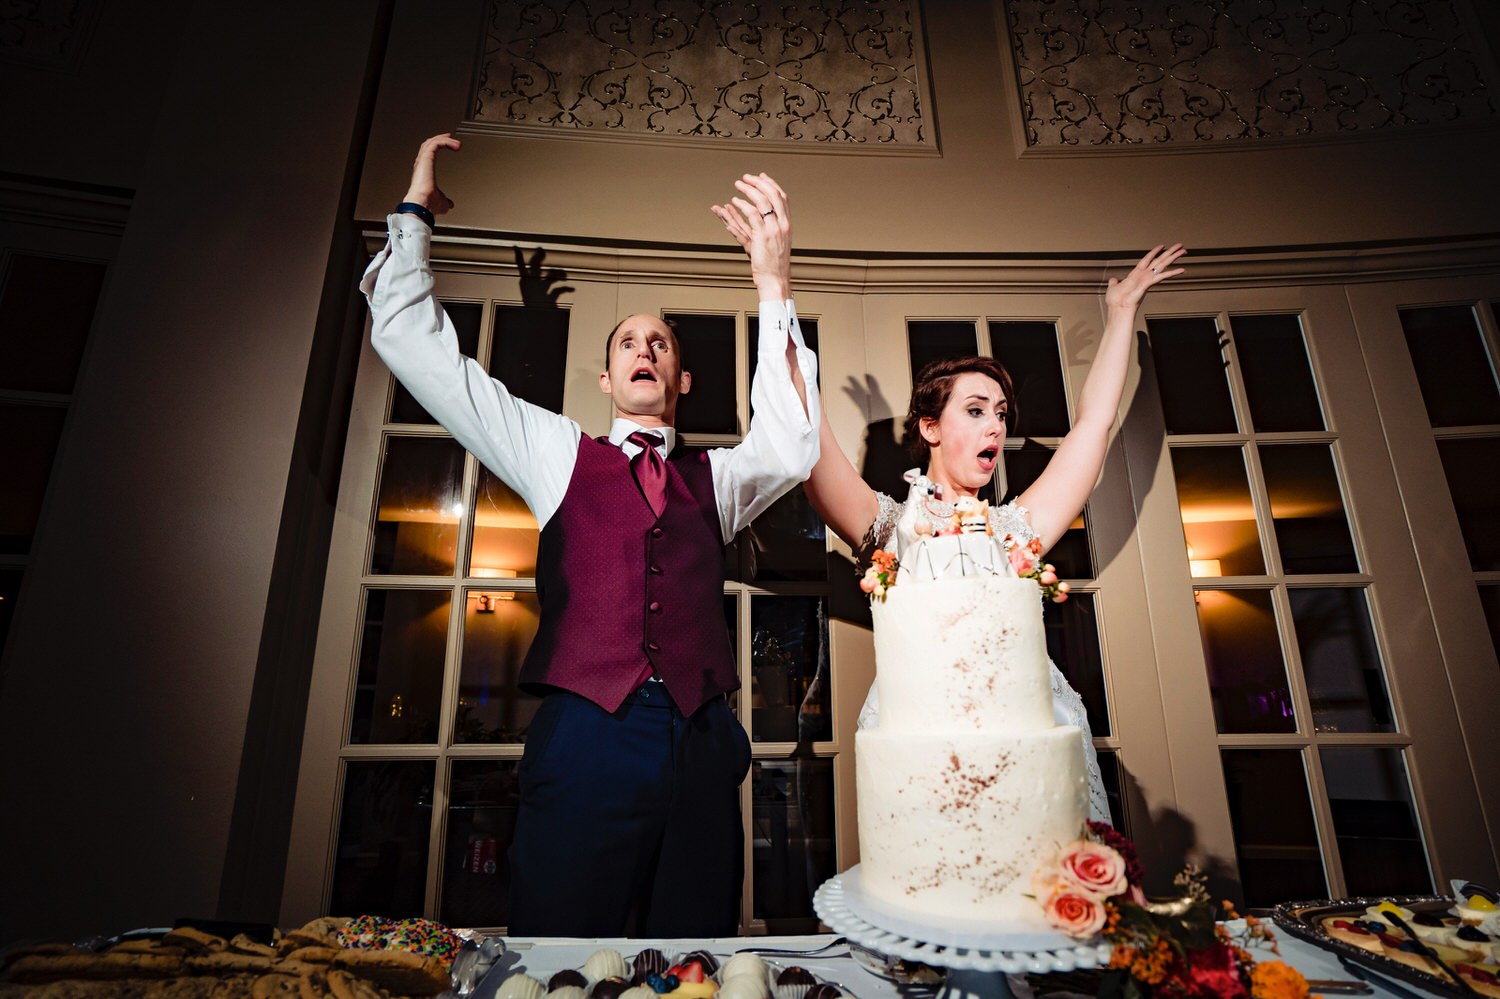 A candid picture of a bride and groom throwing their arms up and yelling in celebration just after they cut their wedding cake during their wedding reception at The Elms. 